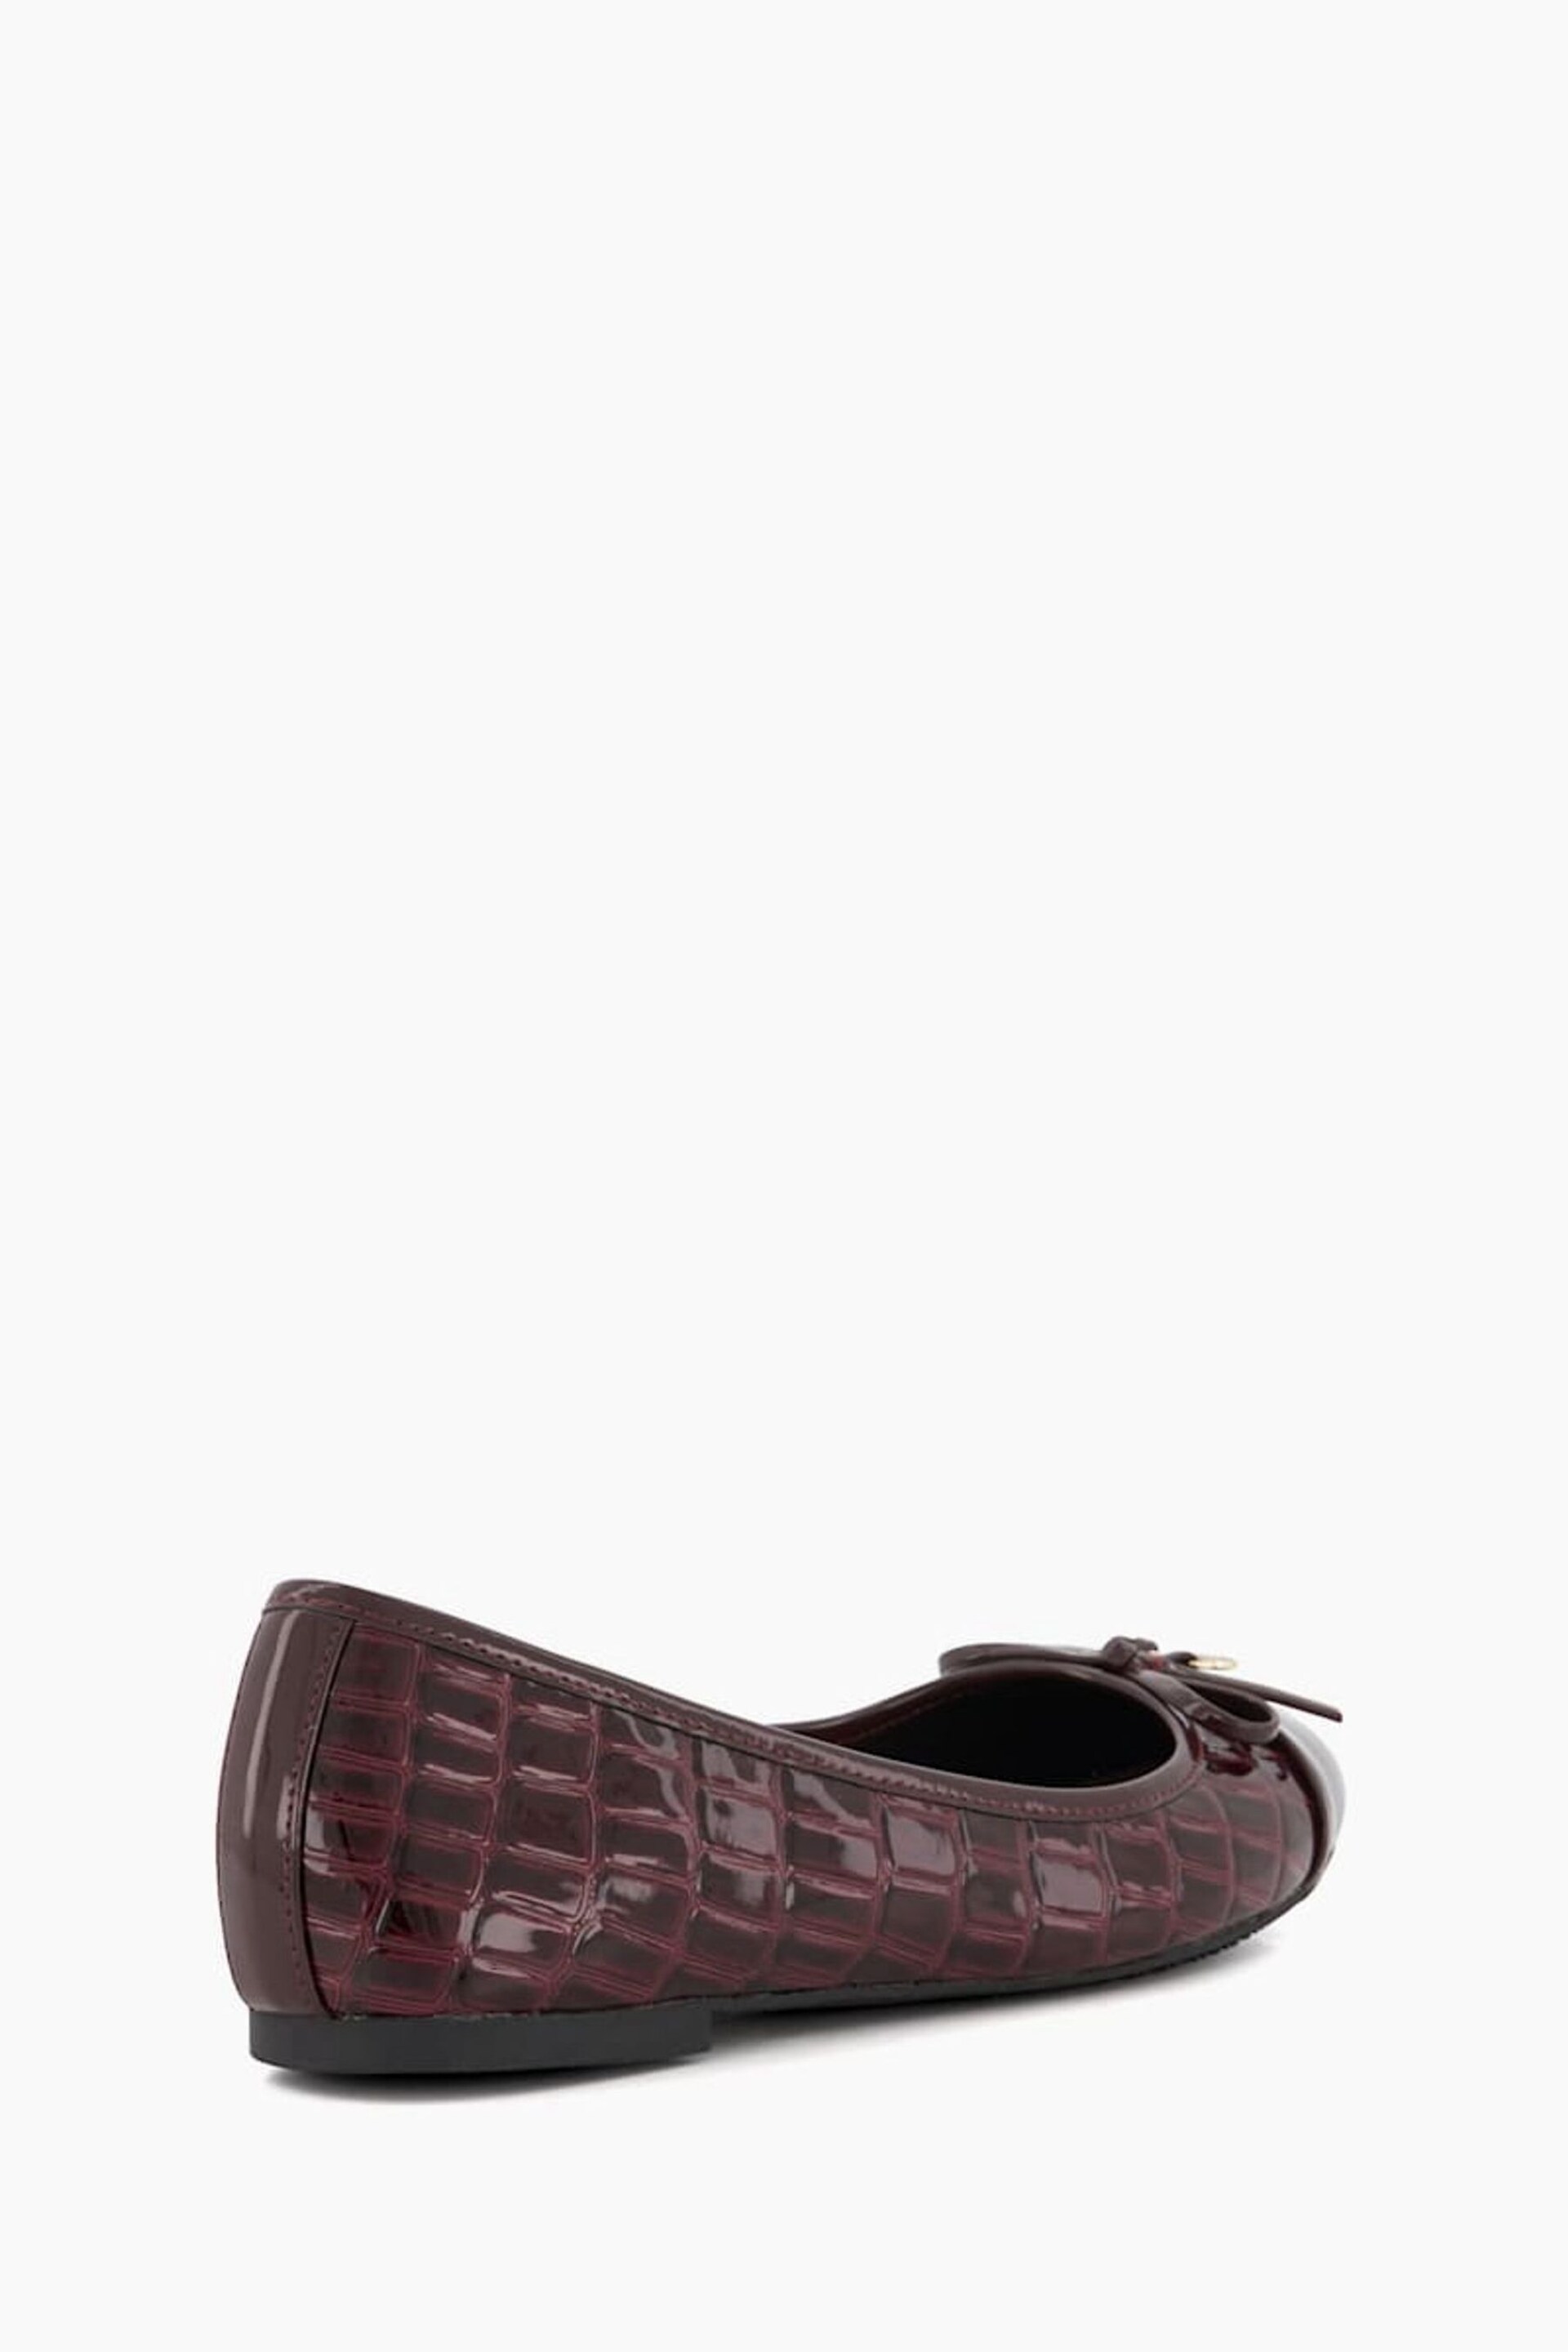 Dune London Red Hallo Charm Trim Ballet Shoes - Image 3 of 4